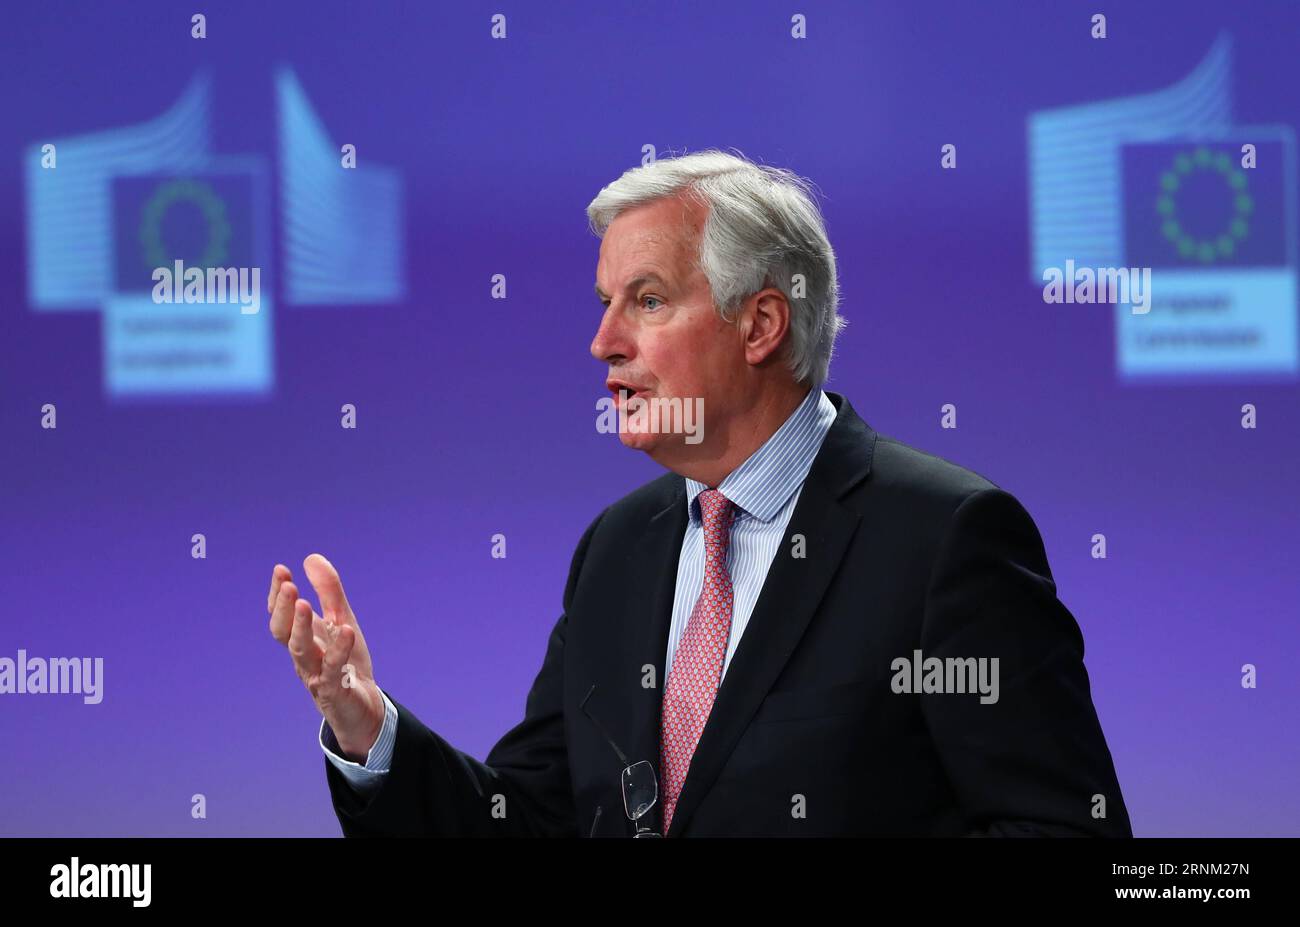 (170503) -- BRUSSELS, May 3, 2017 -- EU s chief Brexit negotiator Michel Barnier speaks during a press conference at EU headquarters in Brussels, Belgium, May 3, 2017. ) (rh) BELGIUM-BRUSSELS-PRESS CONFERENCE GongxBing PUBLICATIONxNOTxINxCHN   Brussels May 3 2017 EU S Chief Brexit Negotiator Michel Barnier Speaks during a Press Conference AT EU Headquarters in Brussels Belgium May 3 2017 Rh Belgium Brussels Press Conference GongxBing PUBLICATIONxNOTxINxCHN Stock Photo